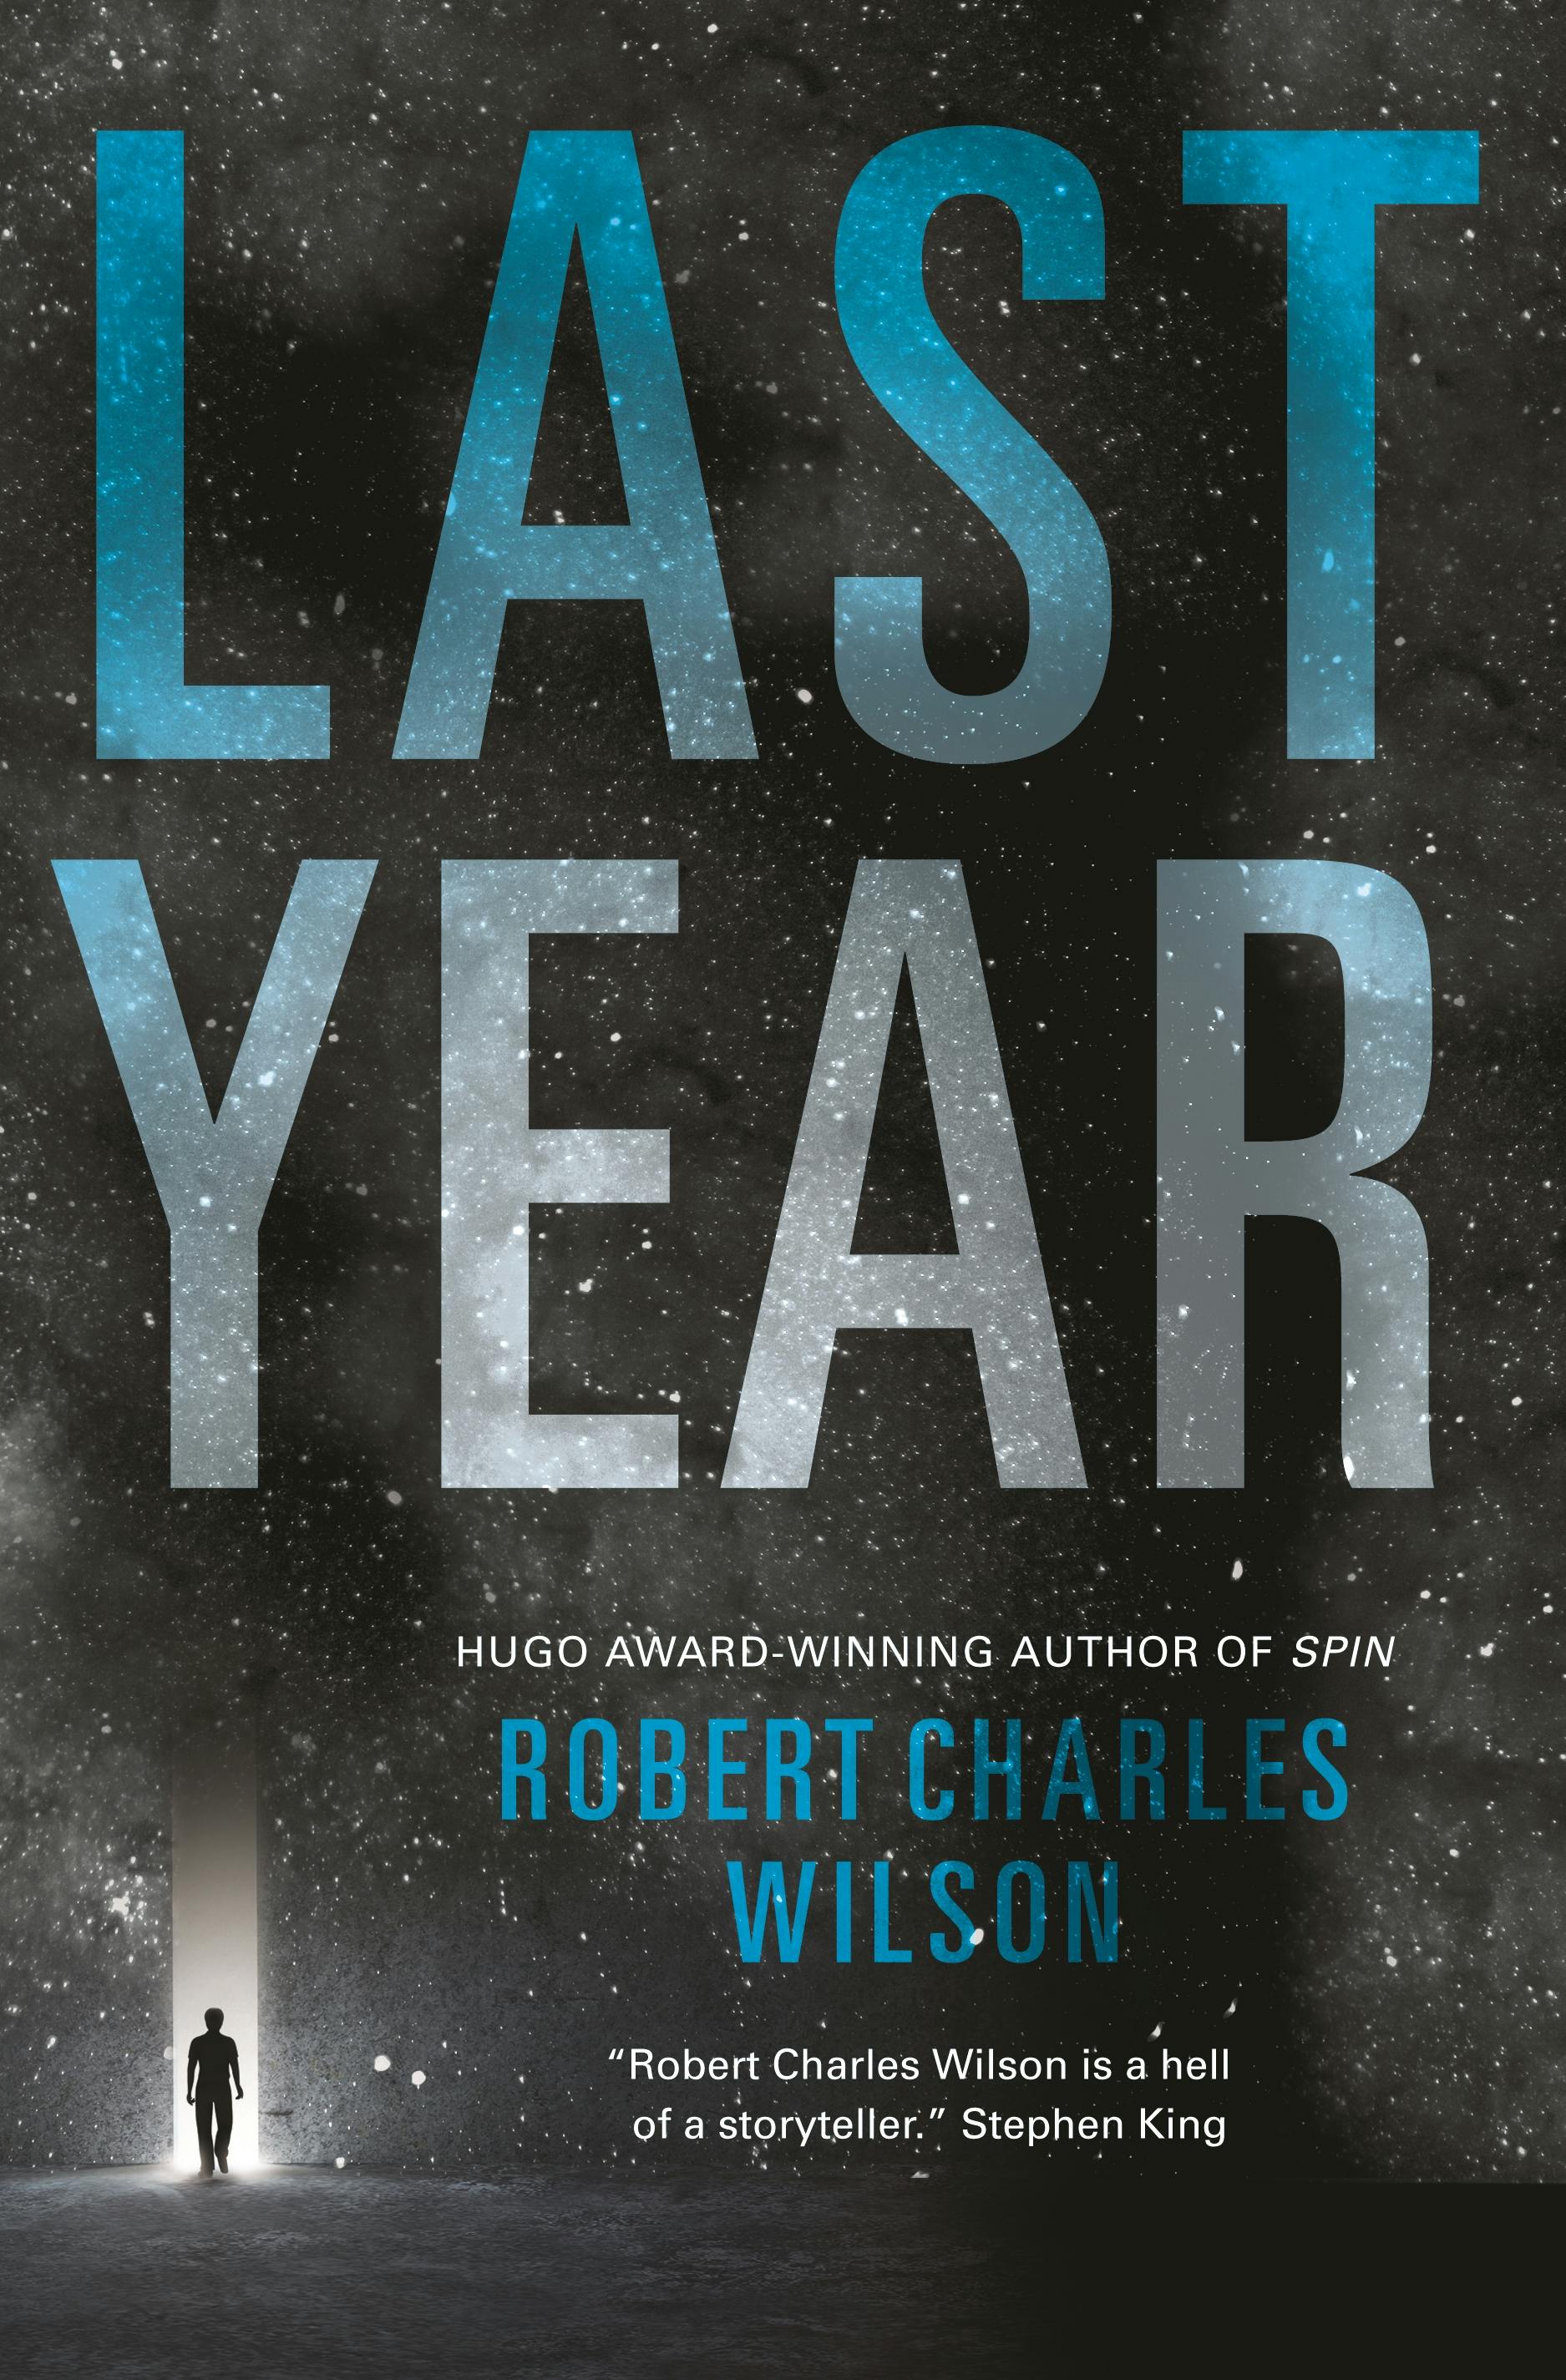 Cover for the book titled as: Last Year